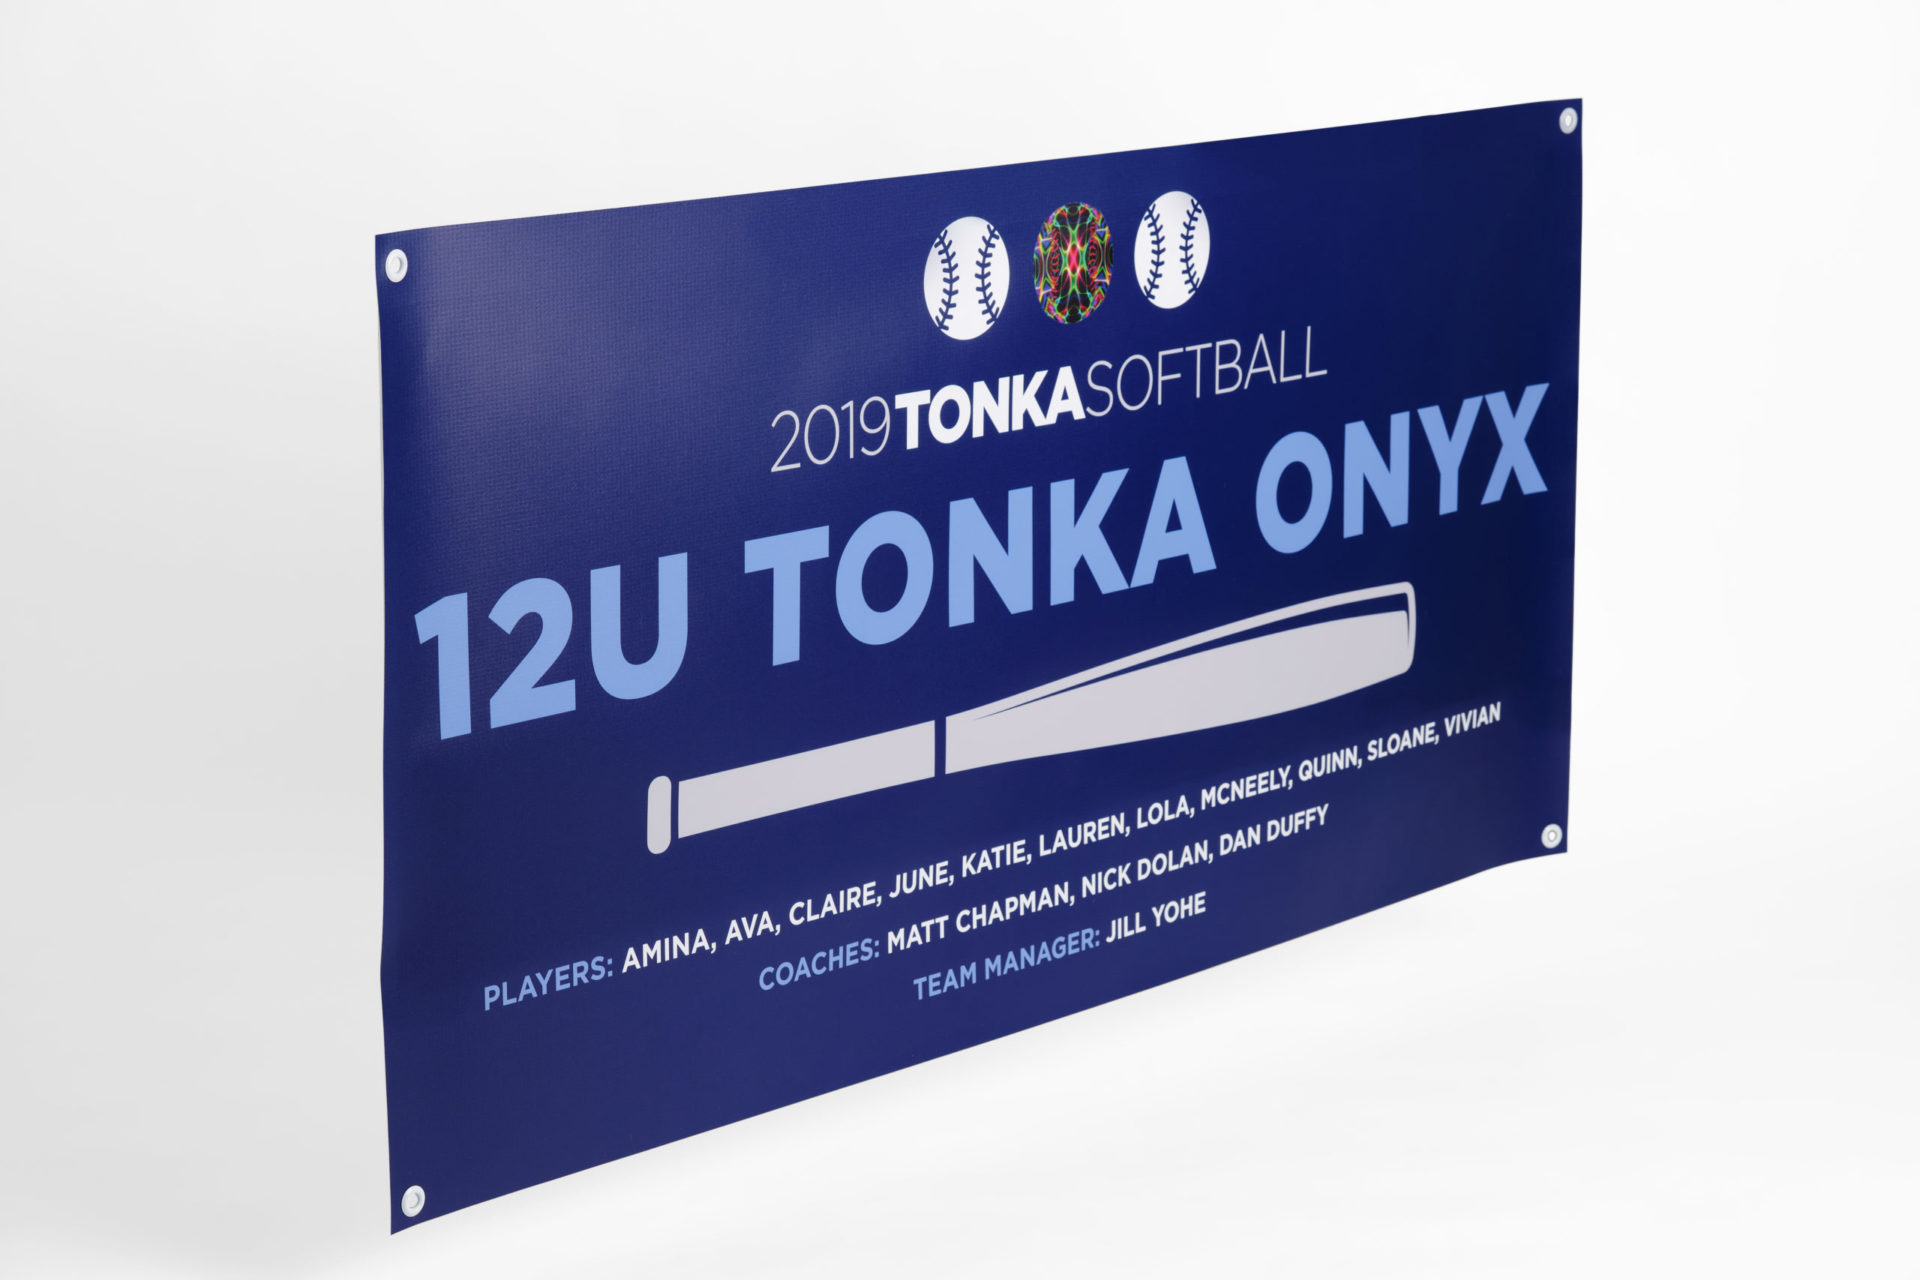 A custom banner printed with a blue background and 12U Tonka Onyx in light blue.